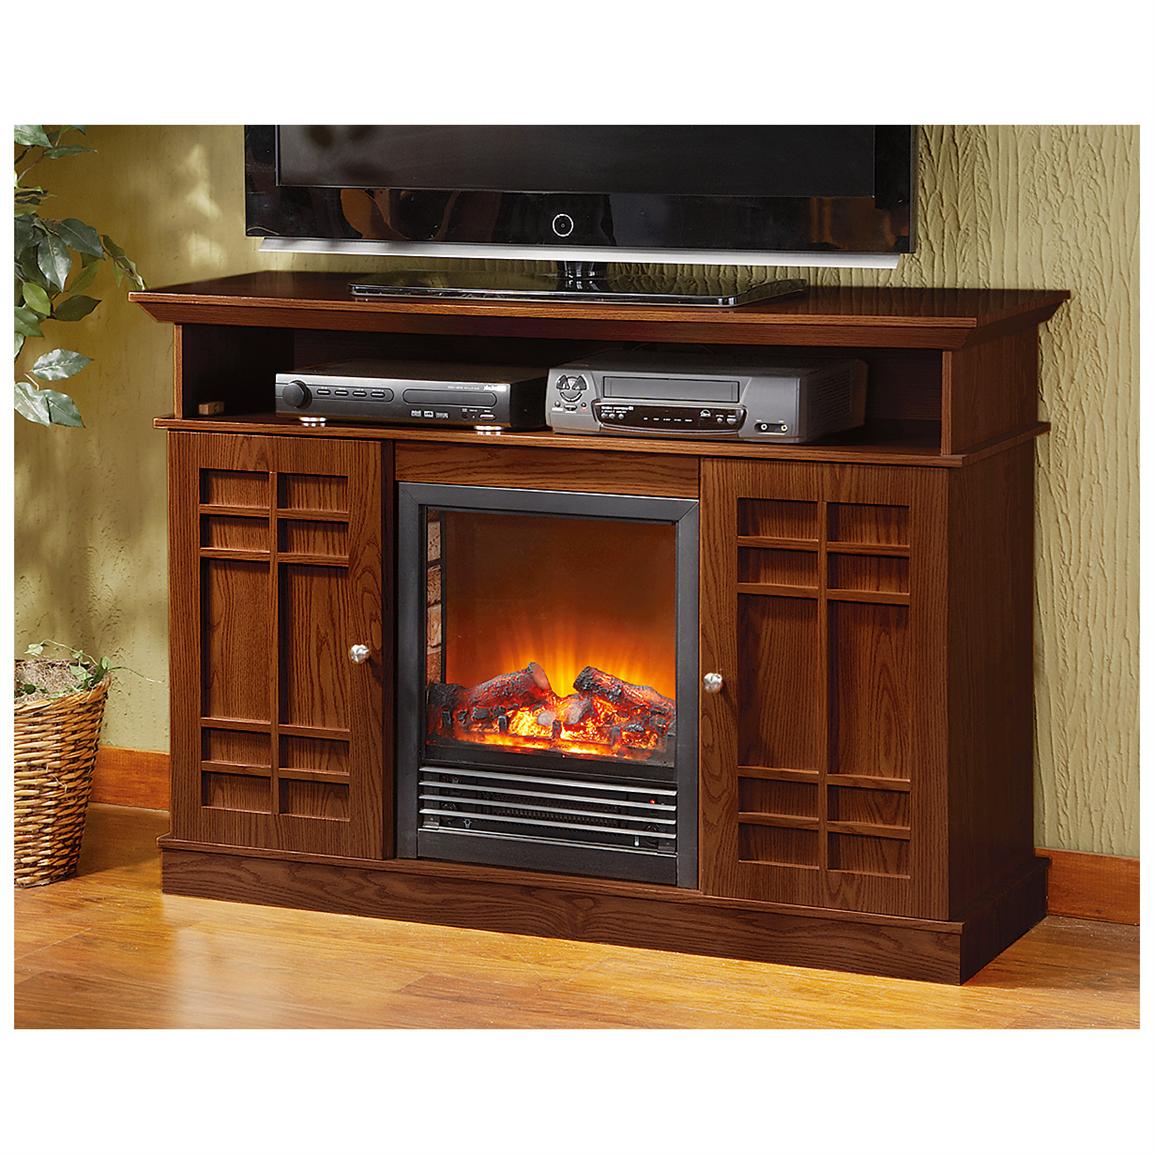 Castlecreek Media Stand Electric Fireplace 227155 Fireplaces At